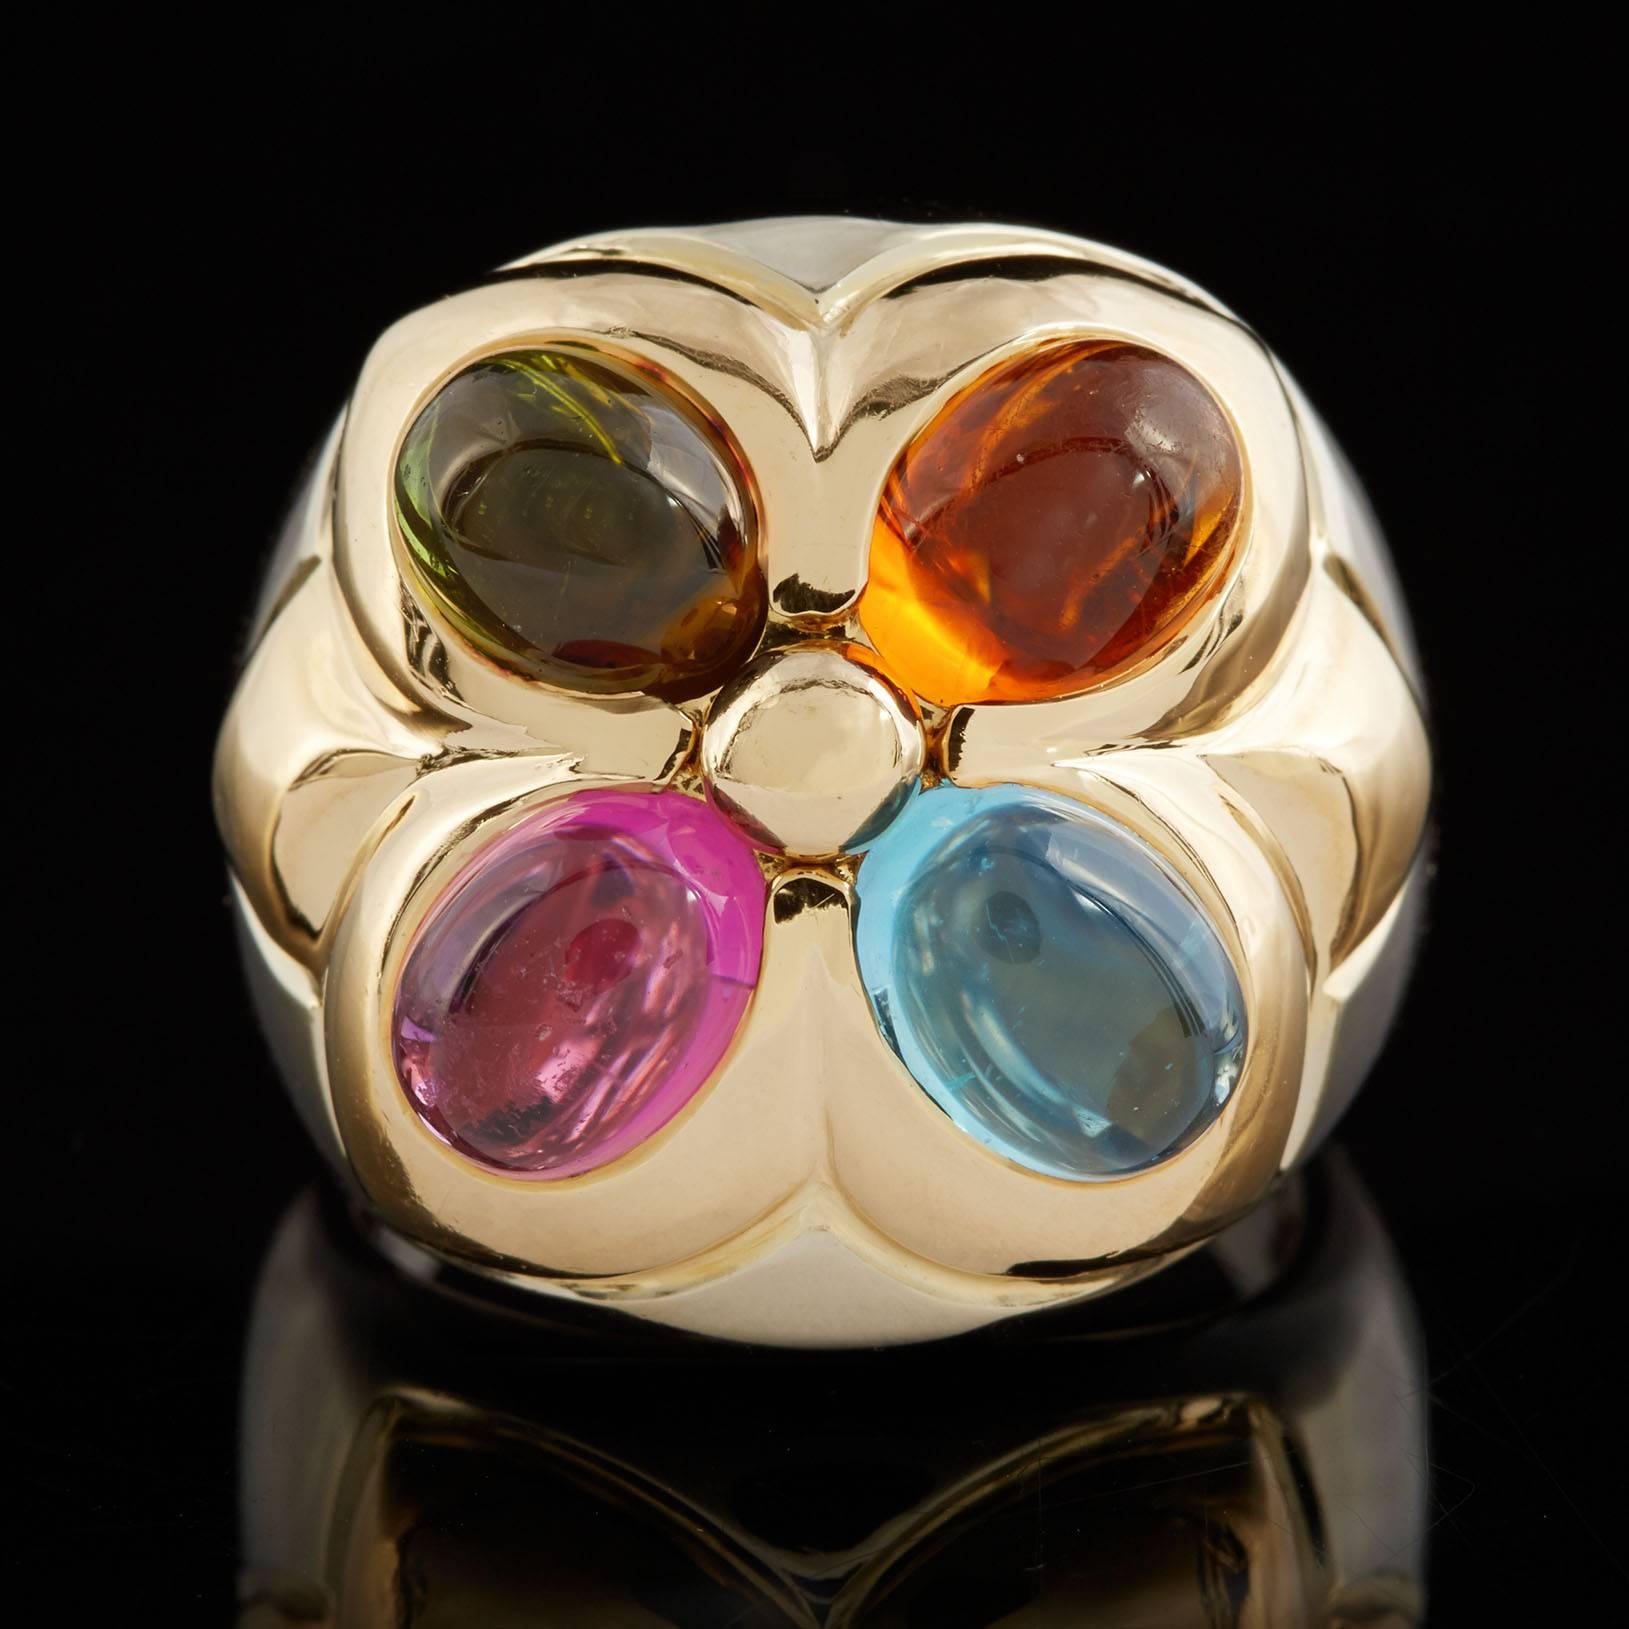 Bulgari 18k yellow gold statement ring features four cabochon-cut blue topaz, green and pink tourmaline, and citrine. The ring measures 20.5mm, tapering to 3.5mm at the back. Currently it fits a size 7, can be adjusted up or down, and weighs 17.7